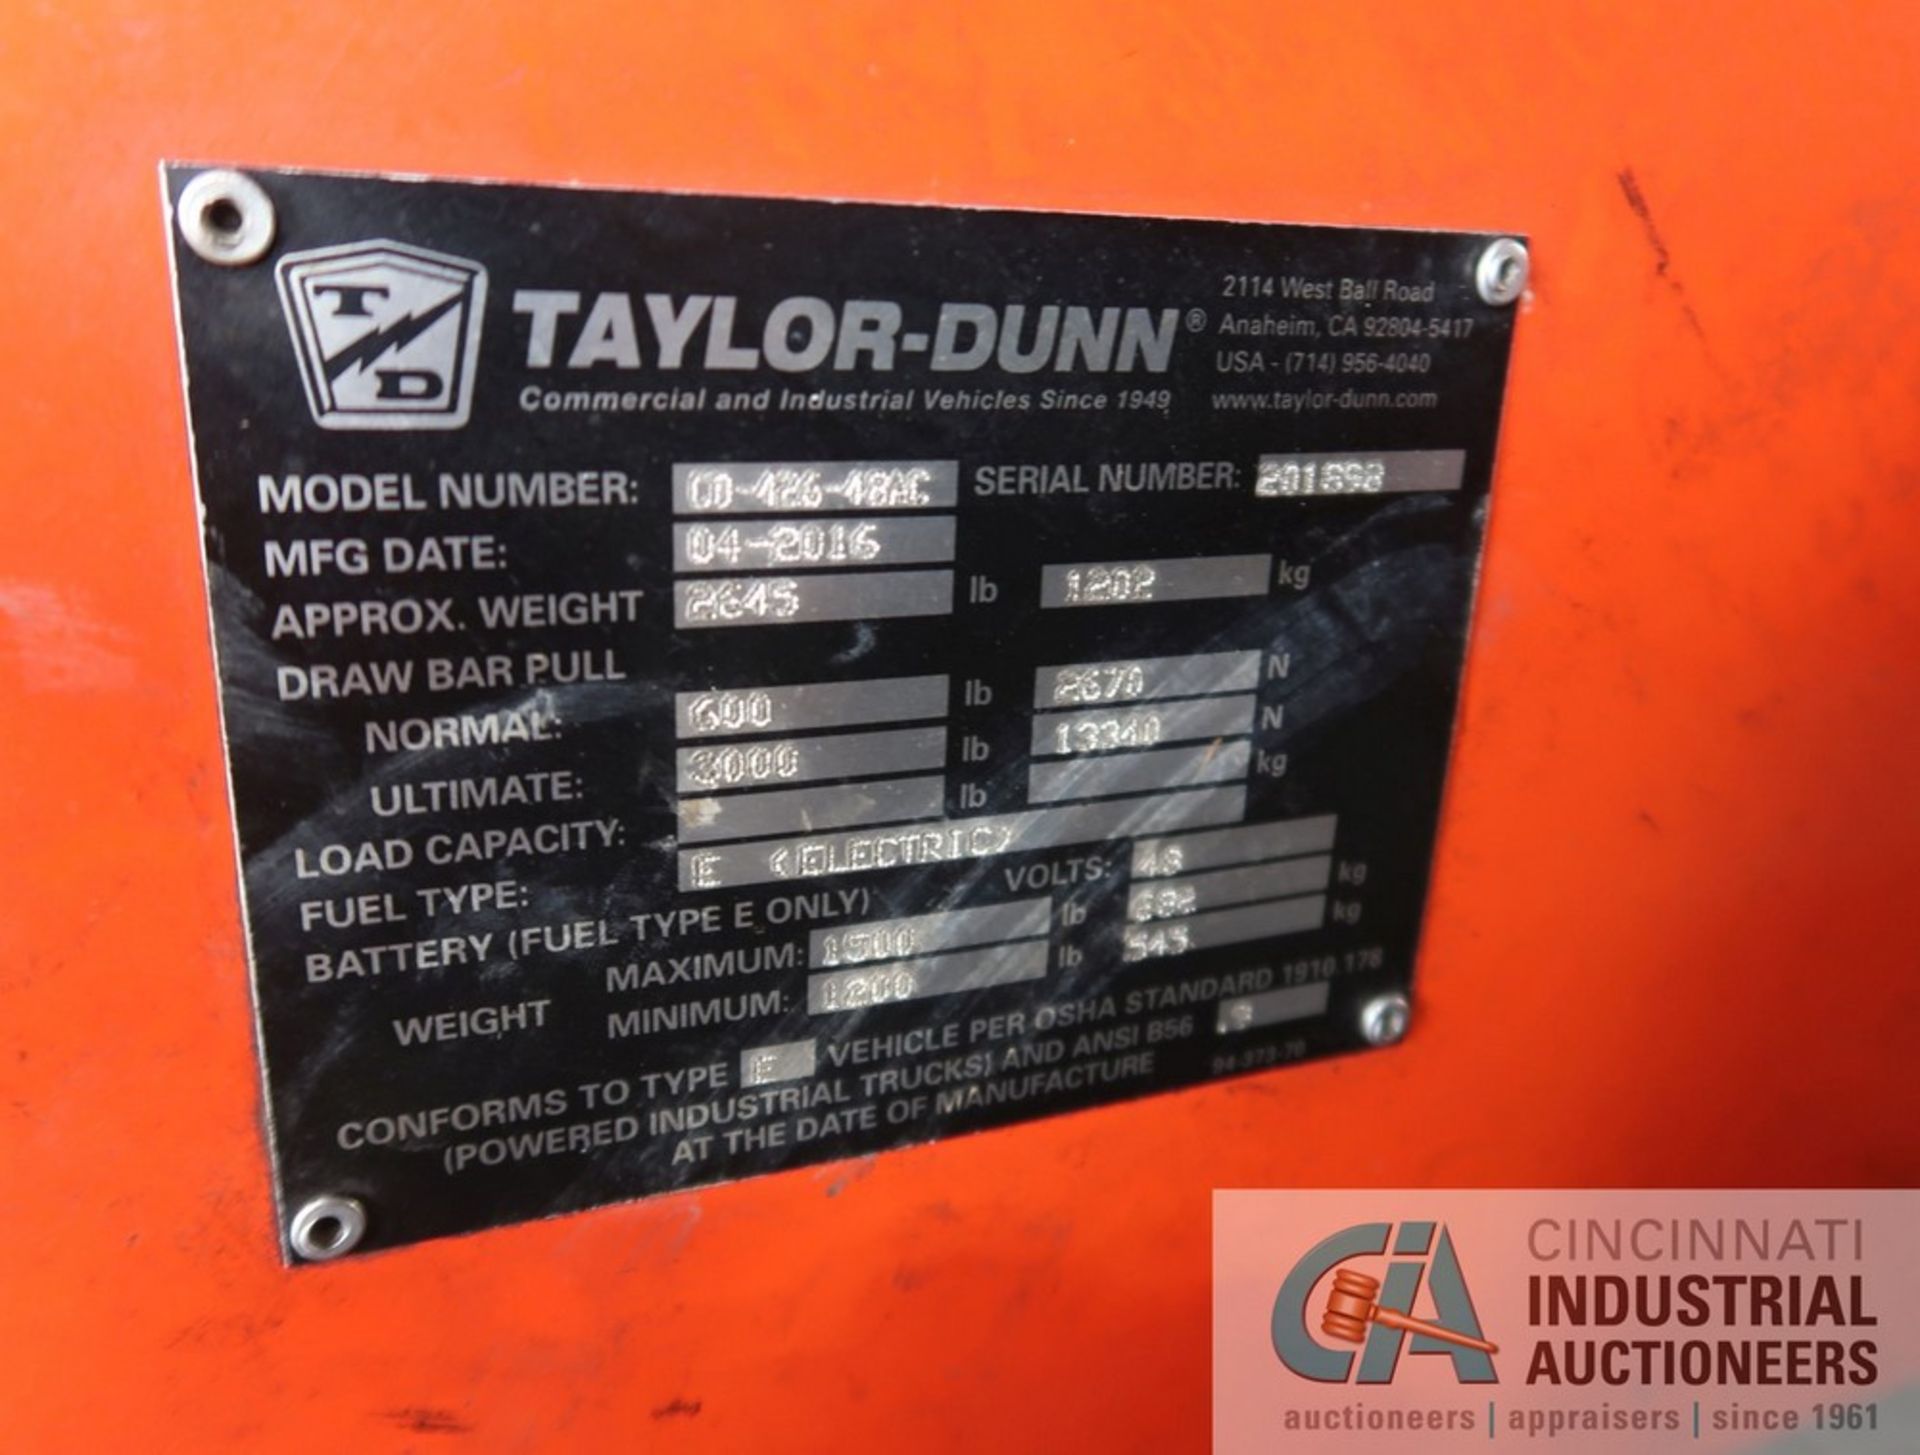 2016 TAYLOR-DUNN MODEL CO-426-48AC HUSKEY II ELECTRIC SIT-DOWN TUGGER; S/N 201898 (NEW 4-2016), 3, - Image 11 of 11